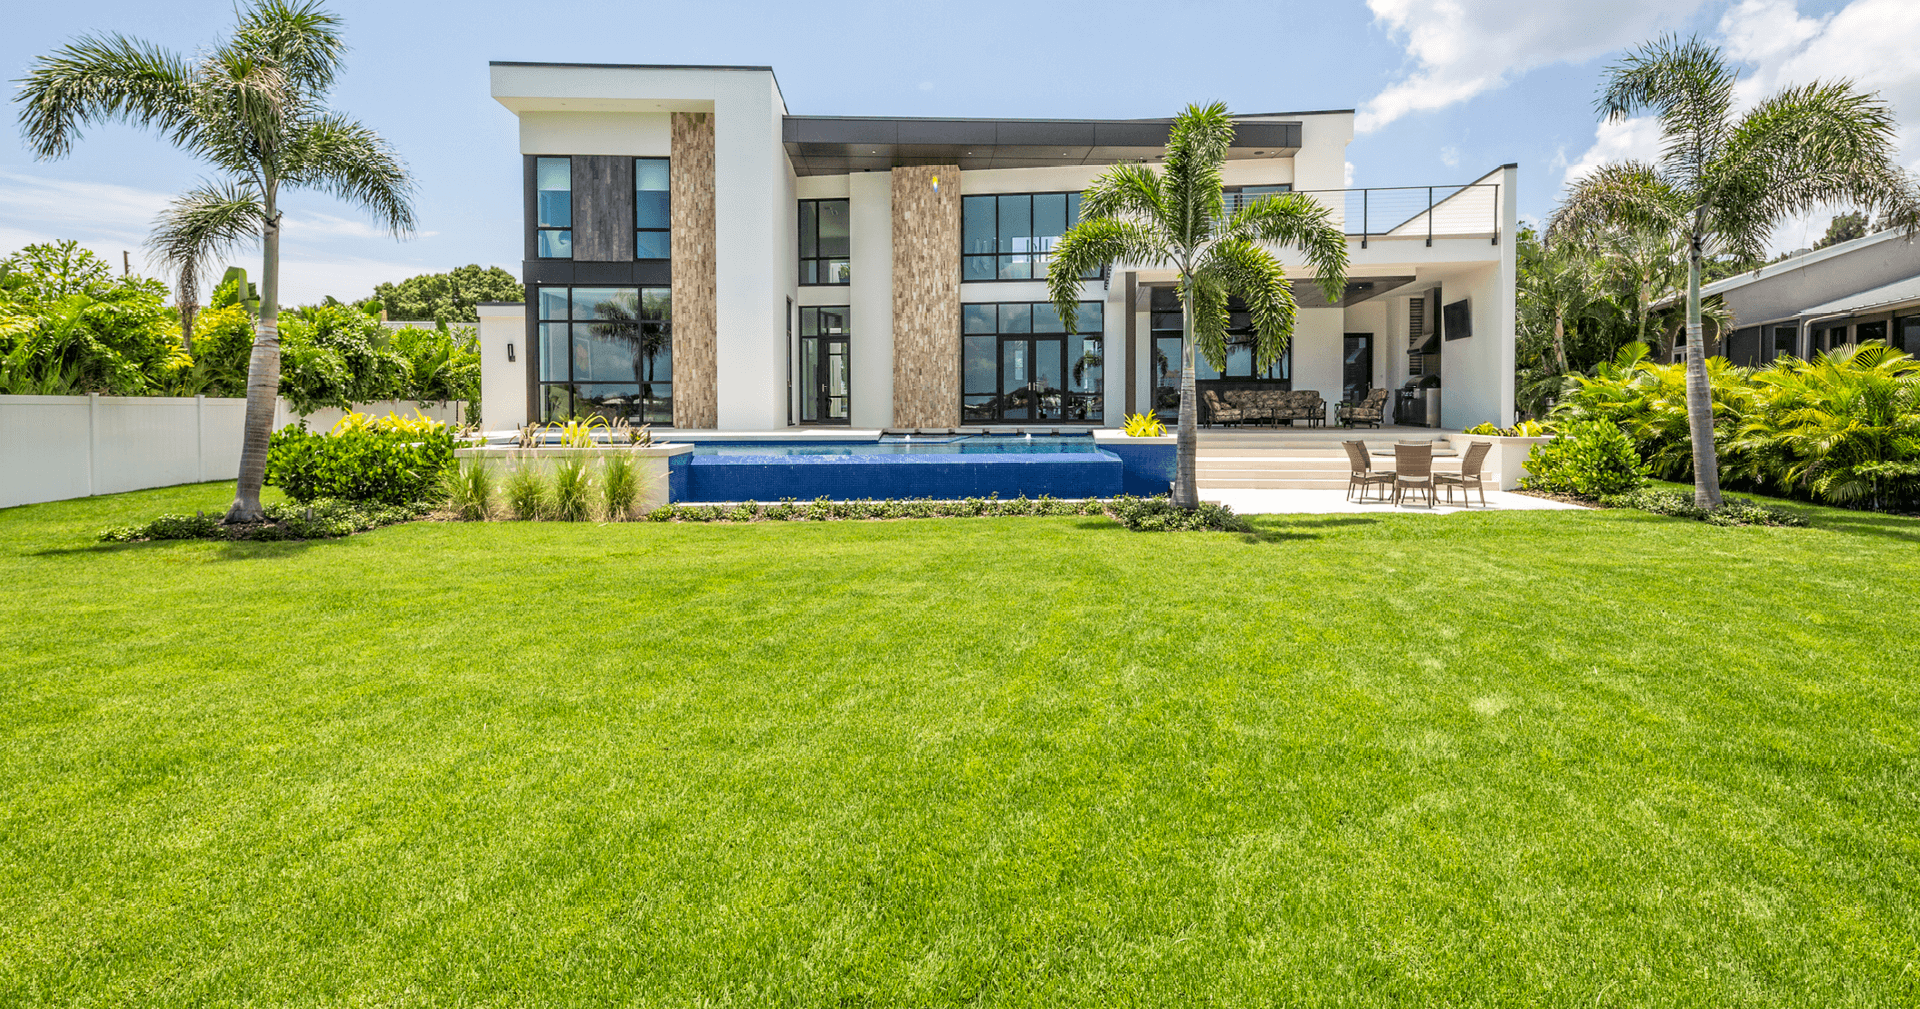 Landscaping on large space with modern home and swimming pool